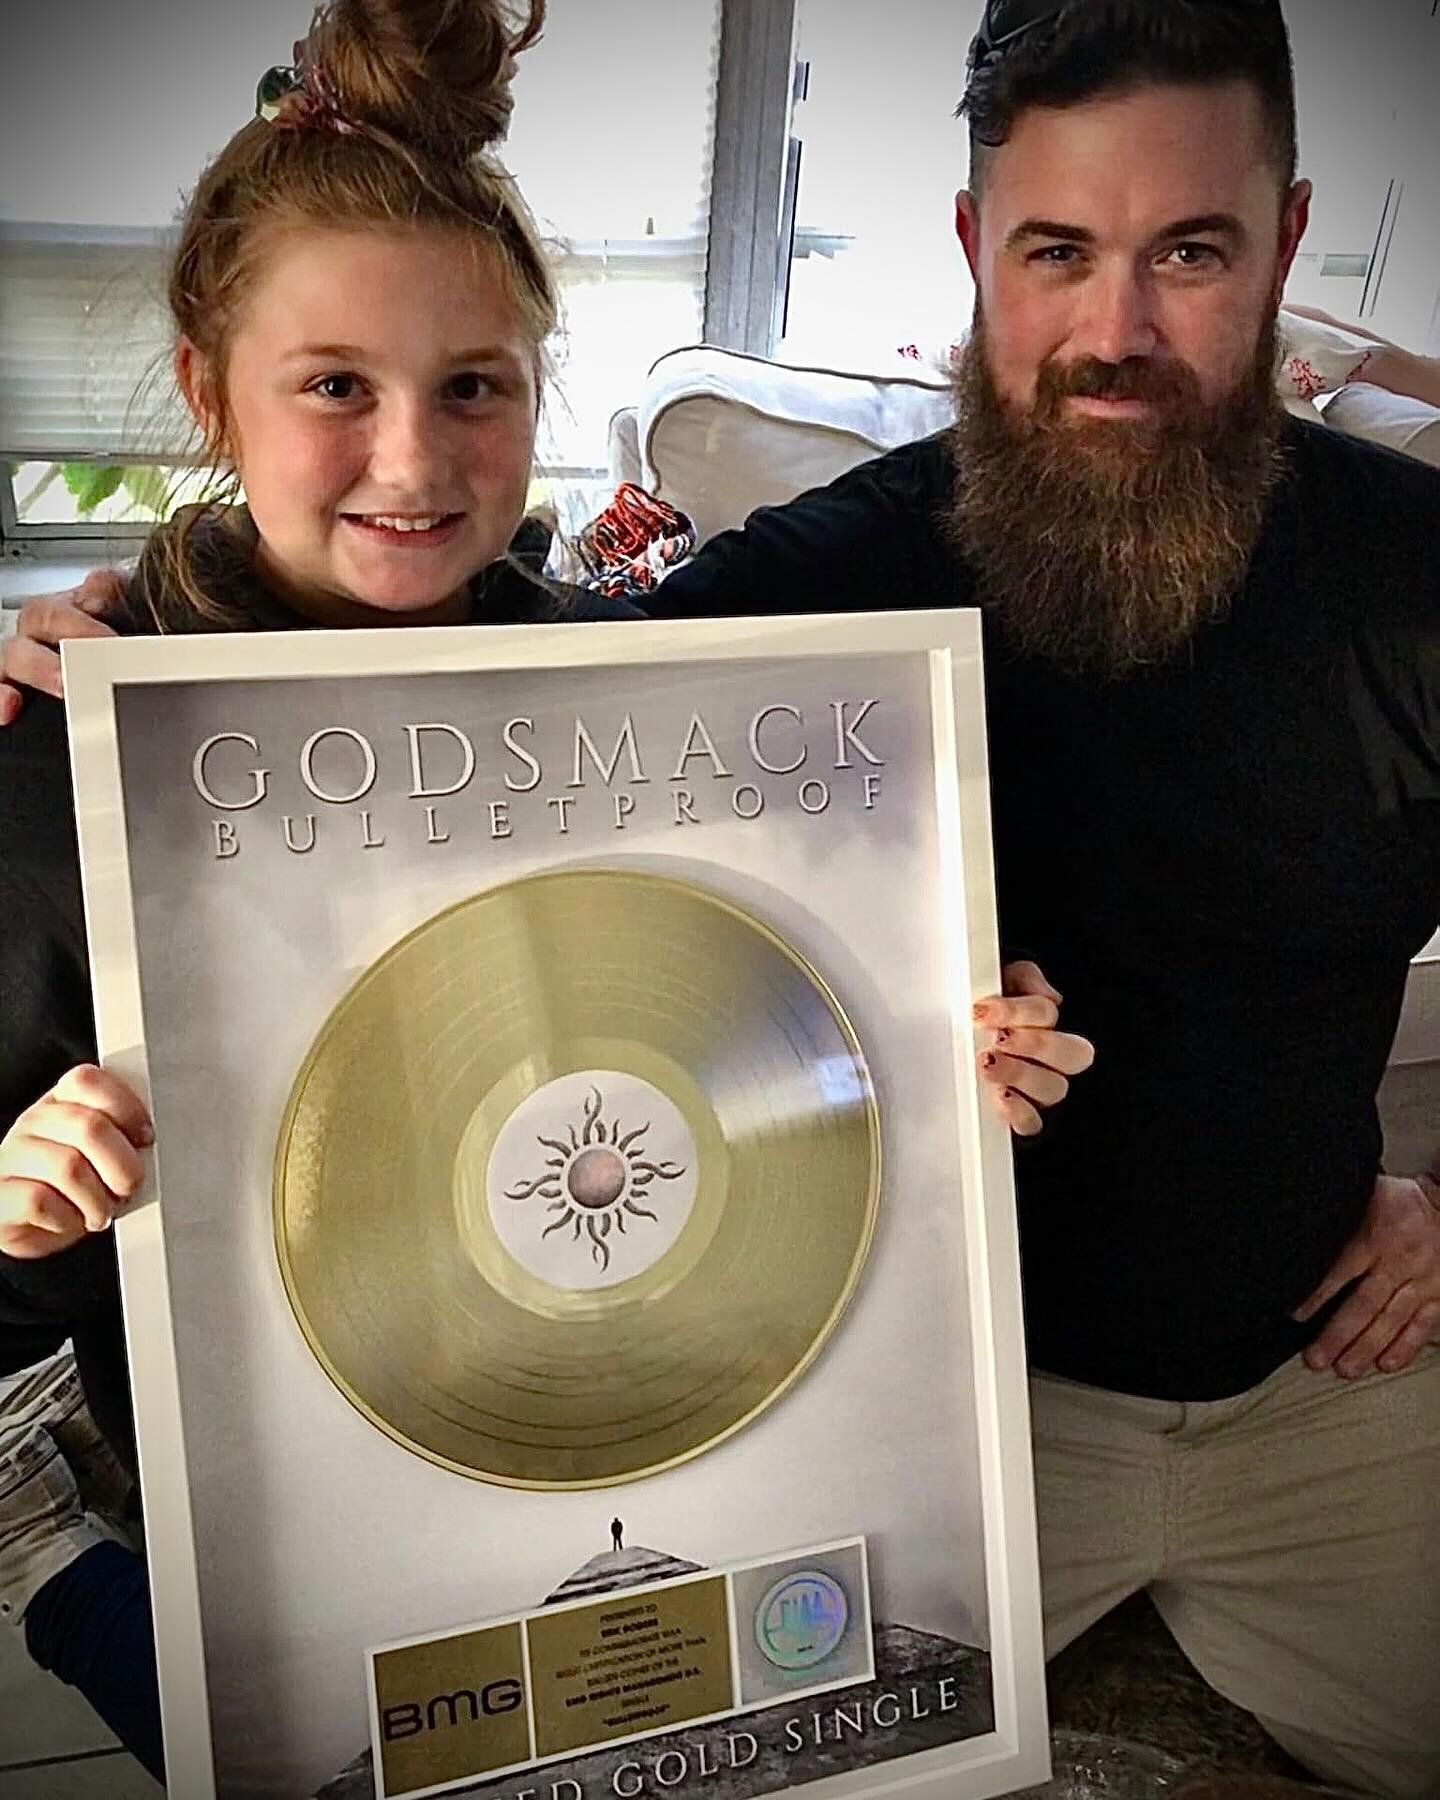 Today in 2019 I received a plaque in the mail from @godsmack

I&rsquo;ve been fortunate to work with some incredible talent over the years and @sullyerna @shannonlarkin_13 @robbiemerrill and no-social-media-having Tony Rombola are the best of the bes